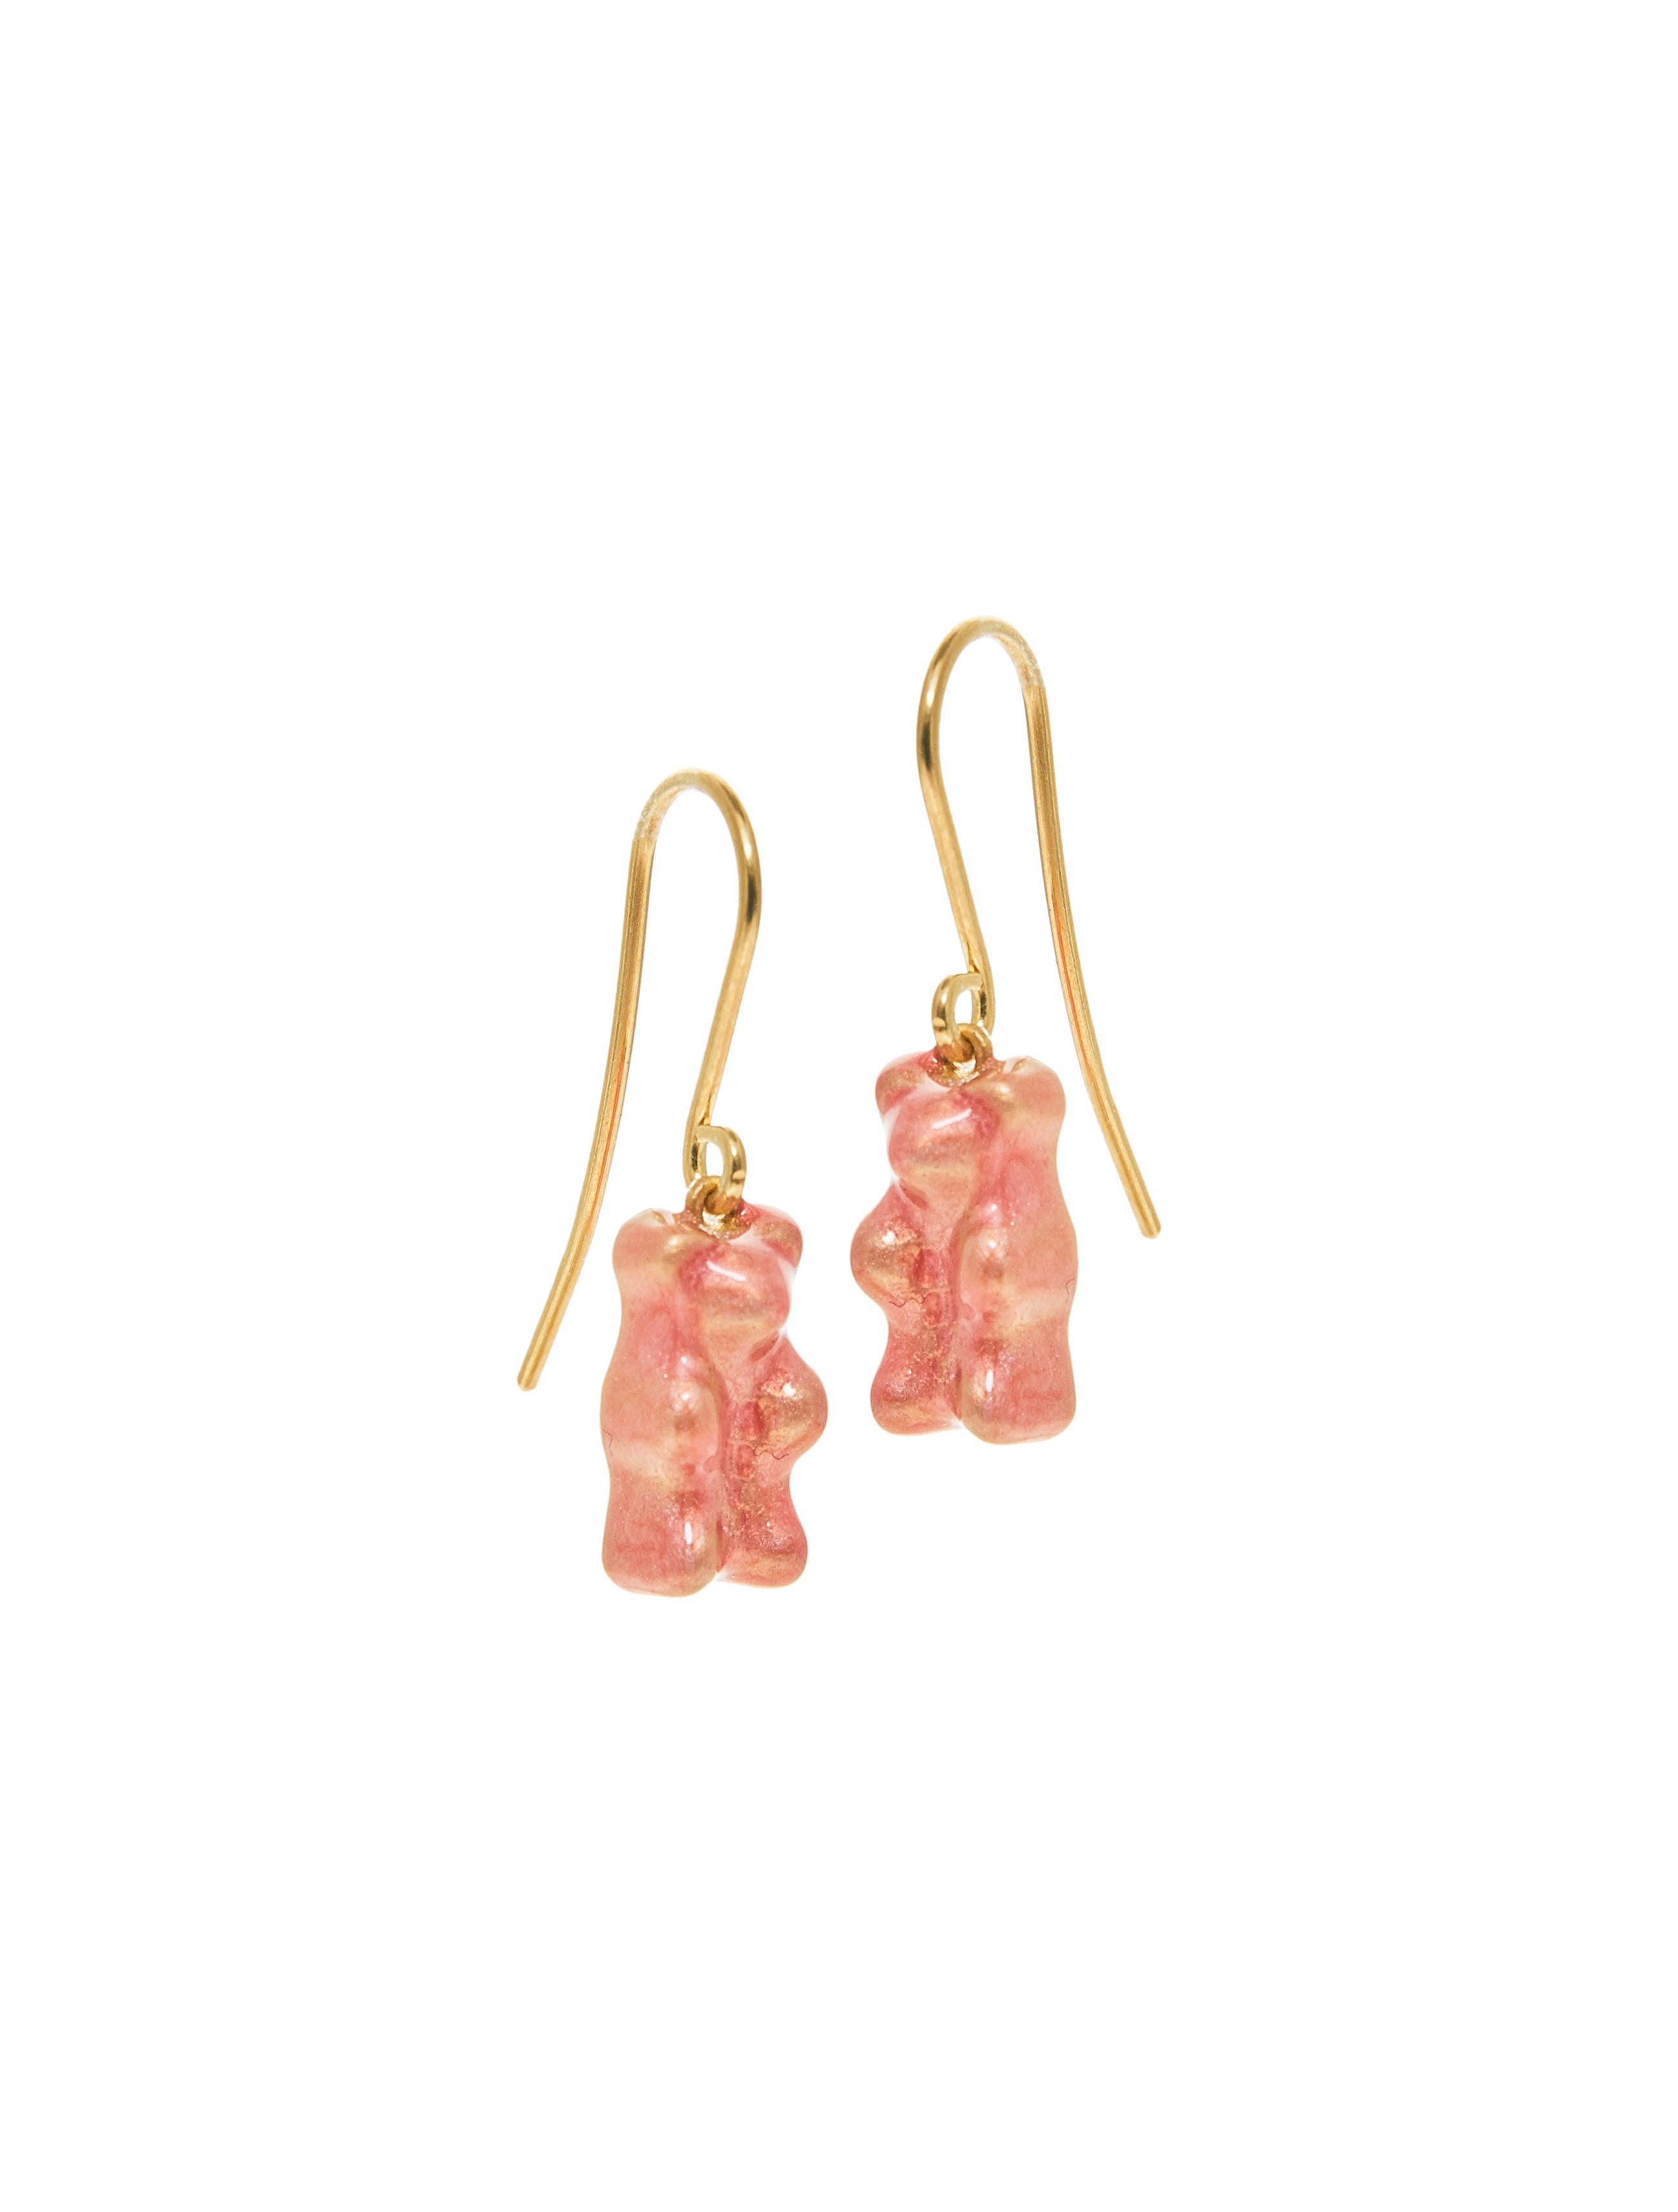 18k Gold plated Silver  gummy bear drop earrings with transparent silver with iridescent pink enamel coverage. 

The Gummy Project by Maggoosh is a capsule collection inspired by the designer's life in New York City and her passion for breakdancing